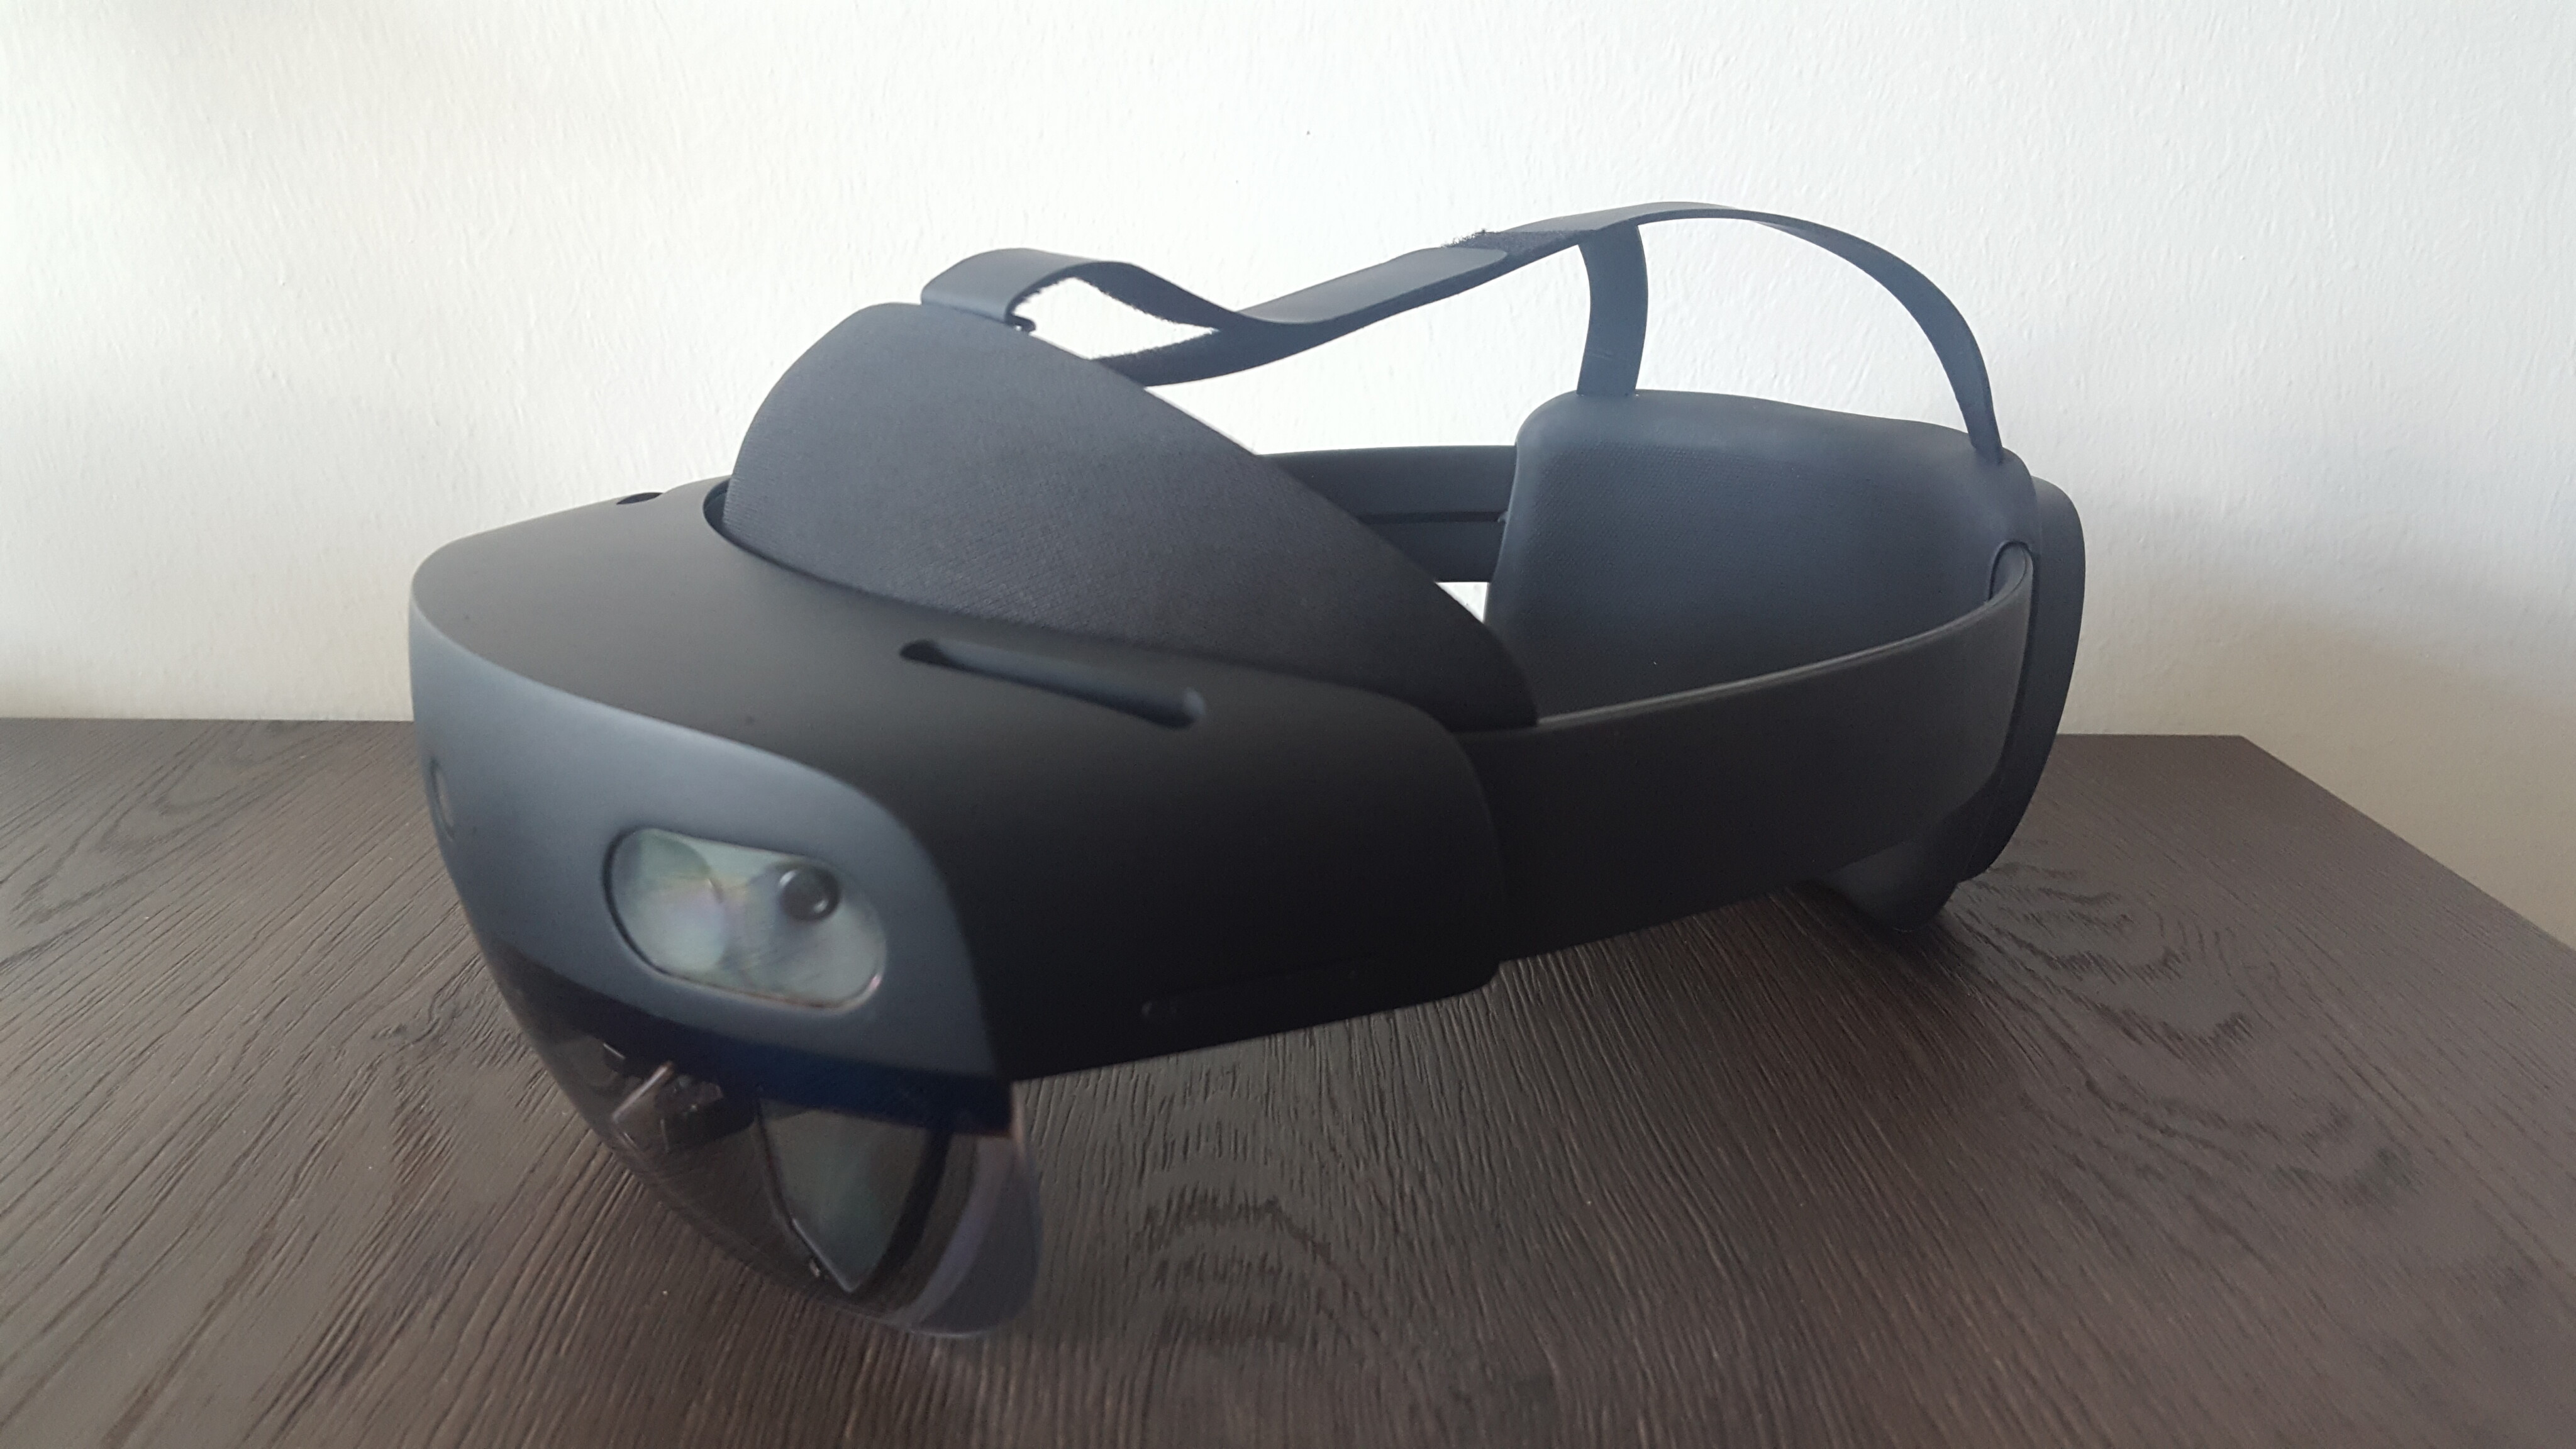 Picture of the Microsoft HoloLens 2